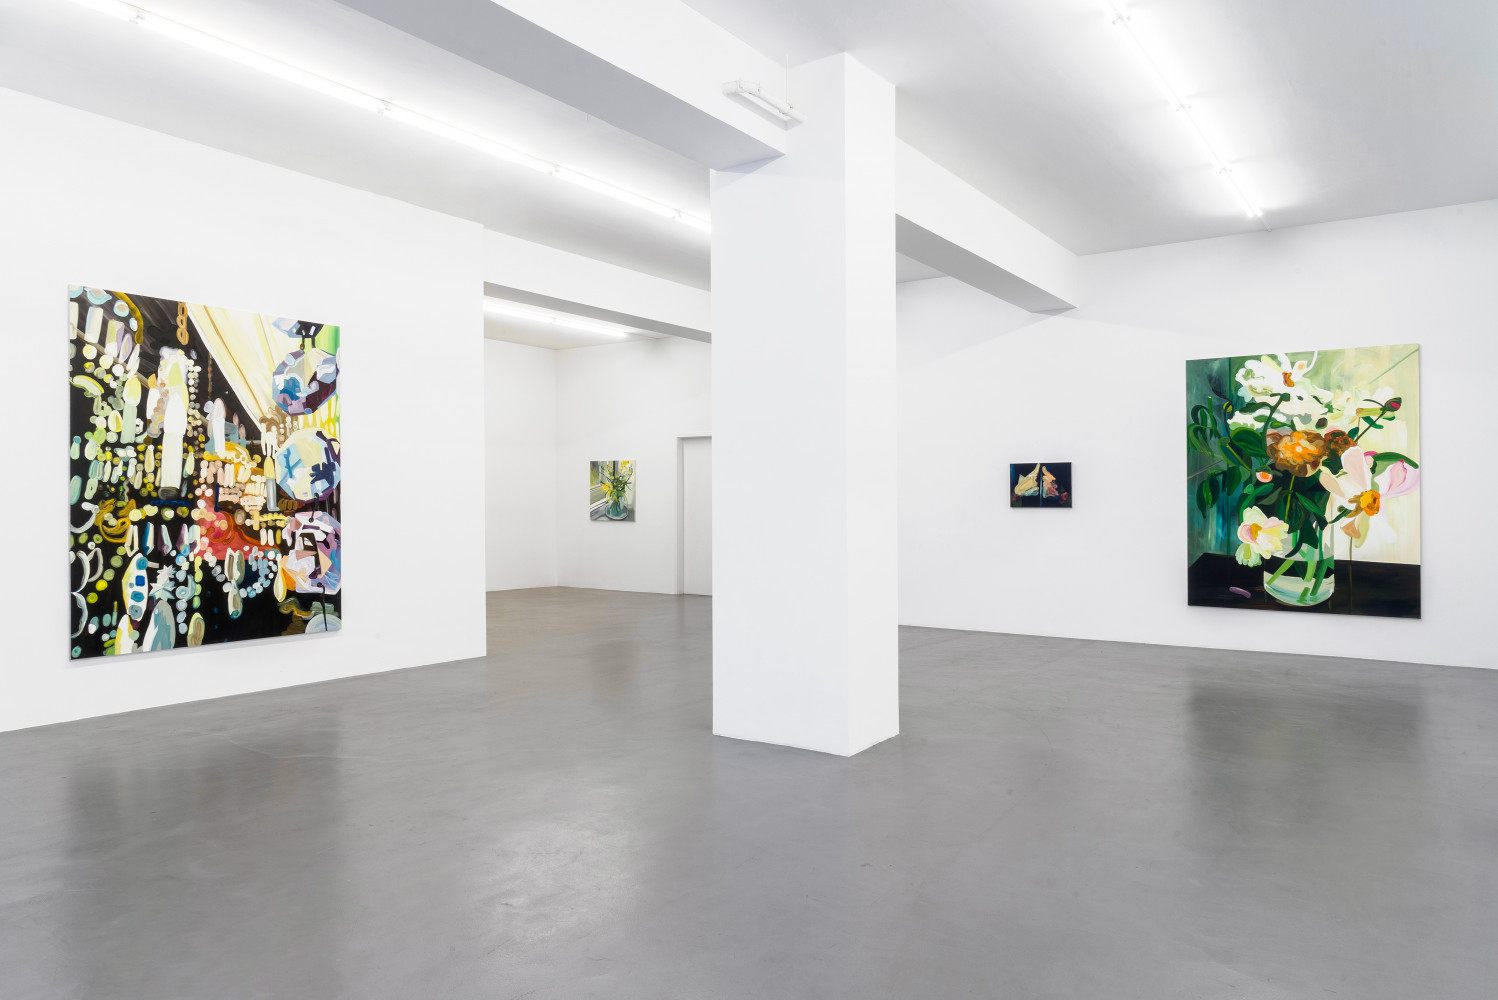 Clare Woods, Installation view, 2020